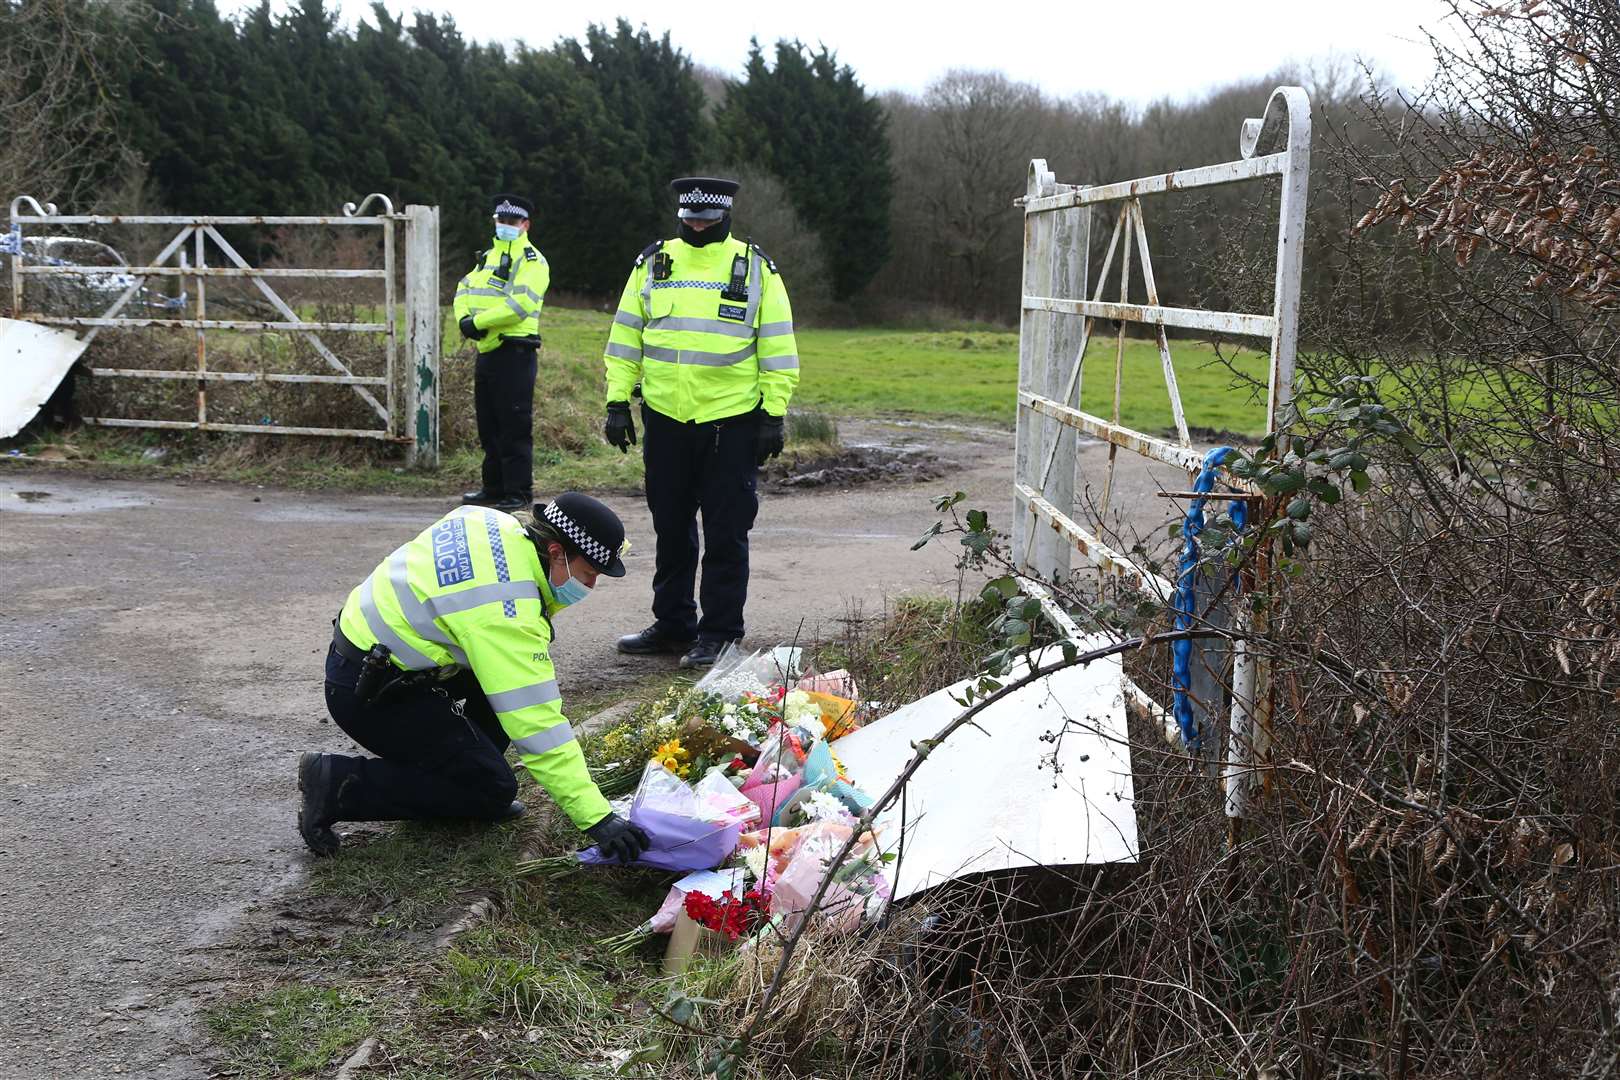 A police officer places flowers left by members of the public at the site as Metropolitan Police continue their search near Great Chart, Kent (Gareth Fuller/PA)